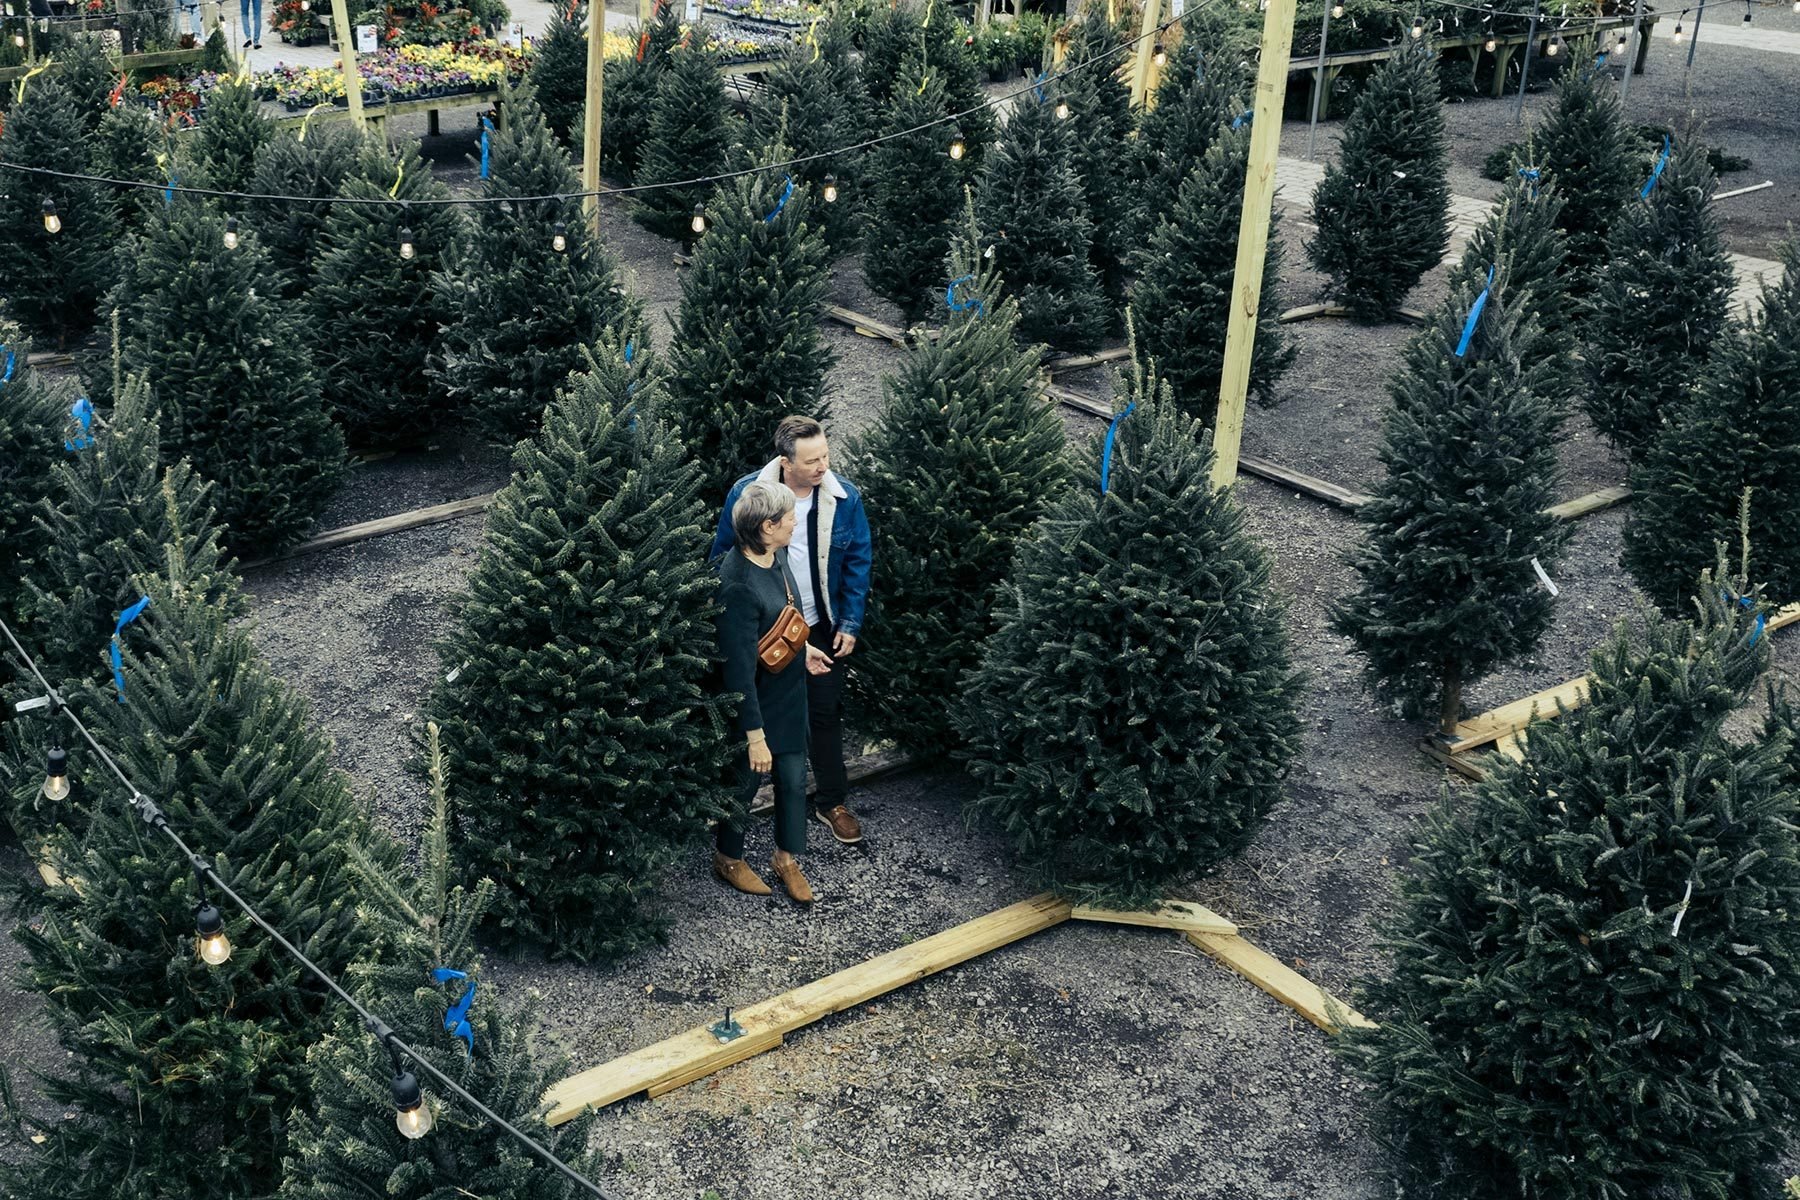 People Looking at The Christmas Trees in the Lot